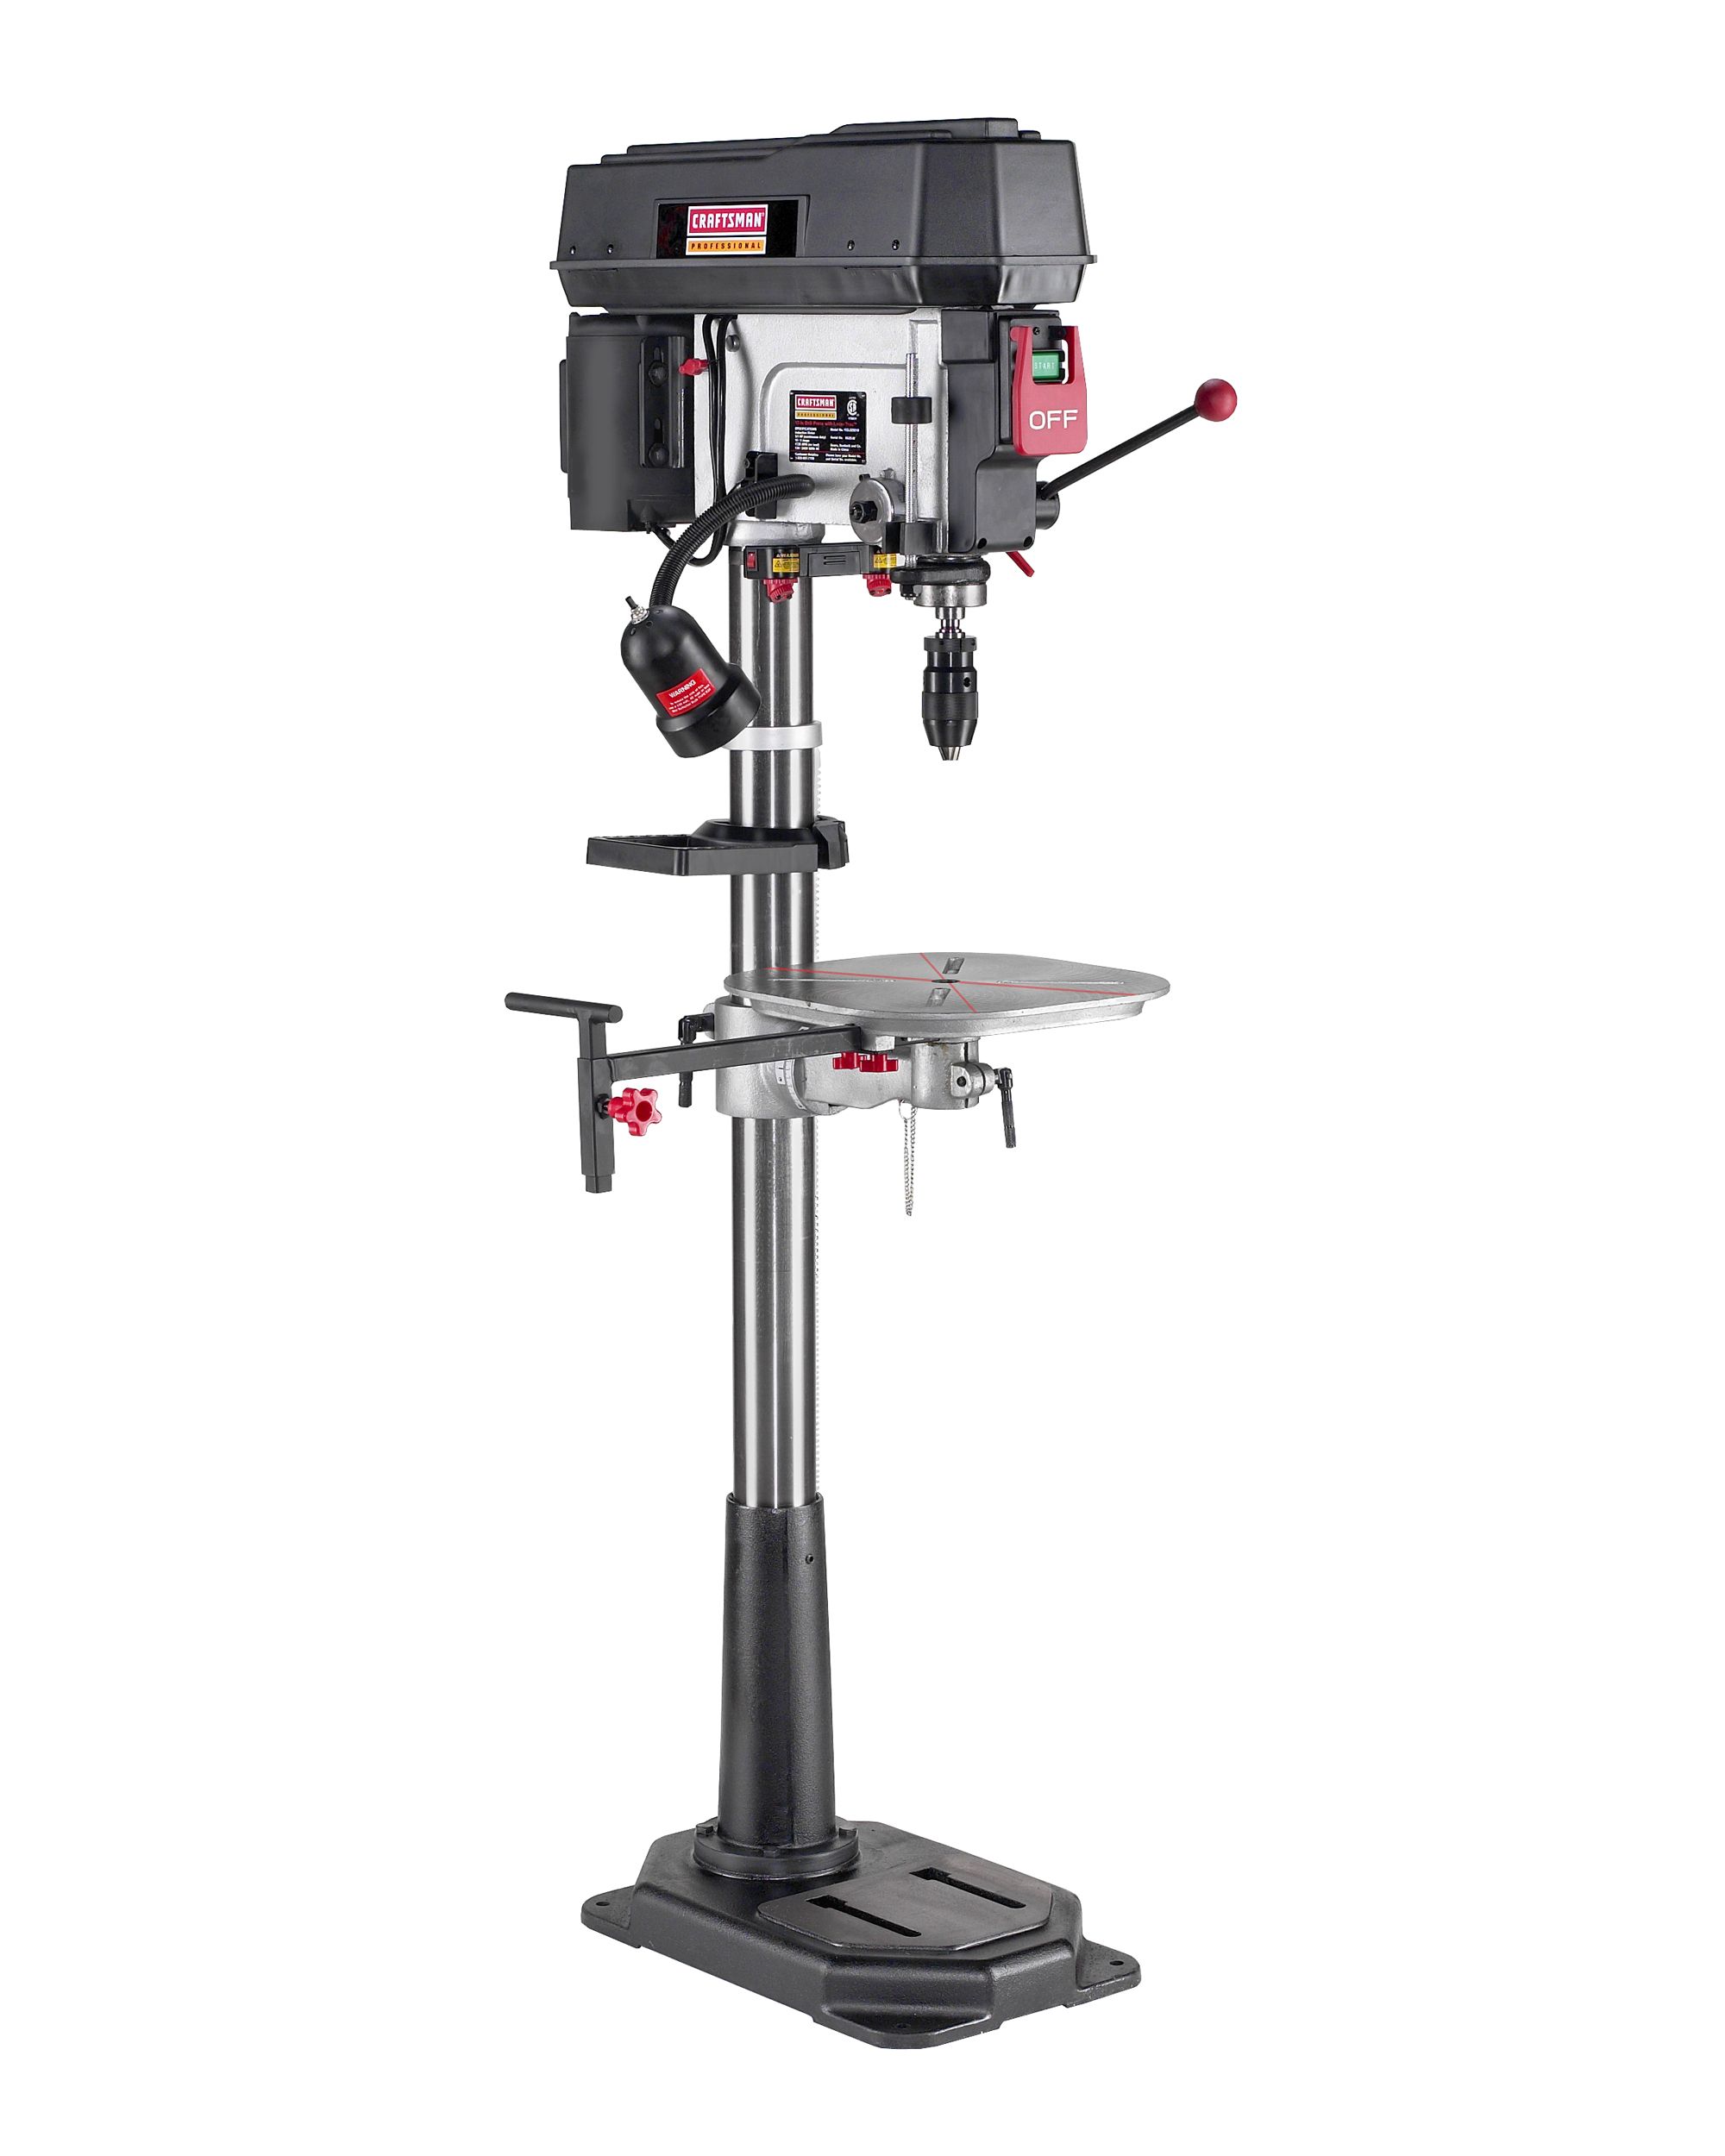 3/4 HP 17 Drill Press: The Power You Need For Precision